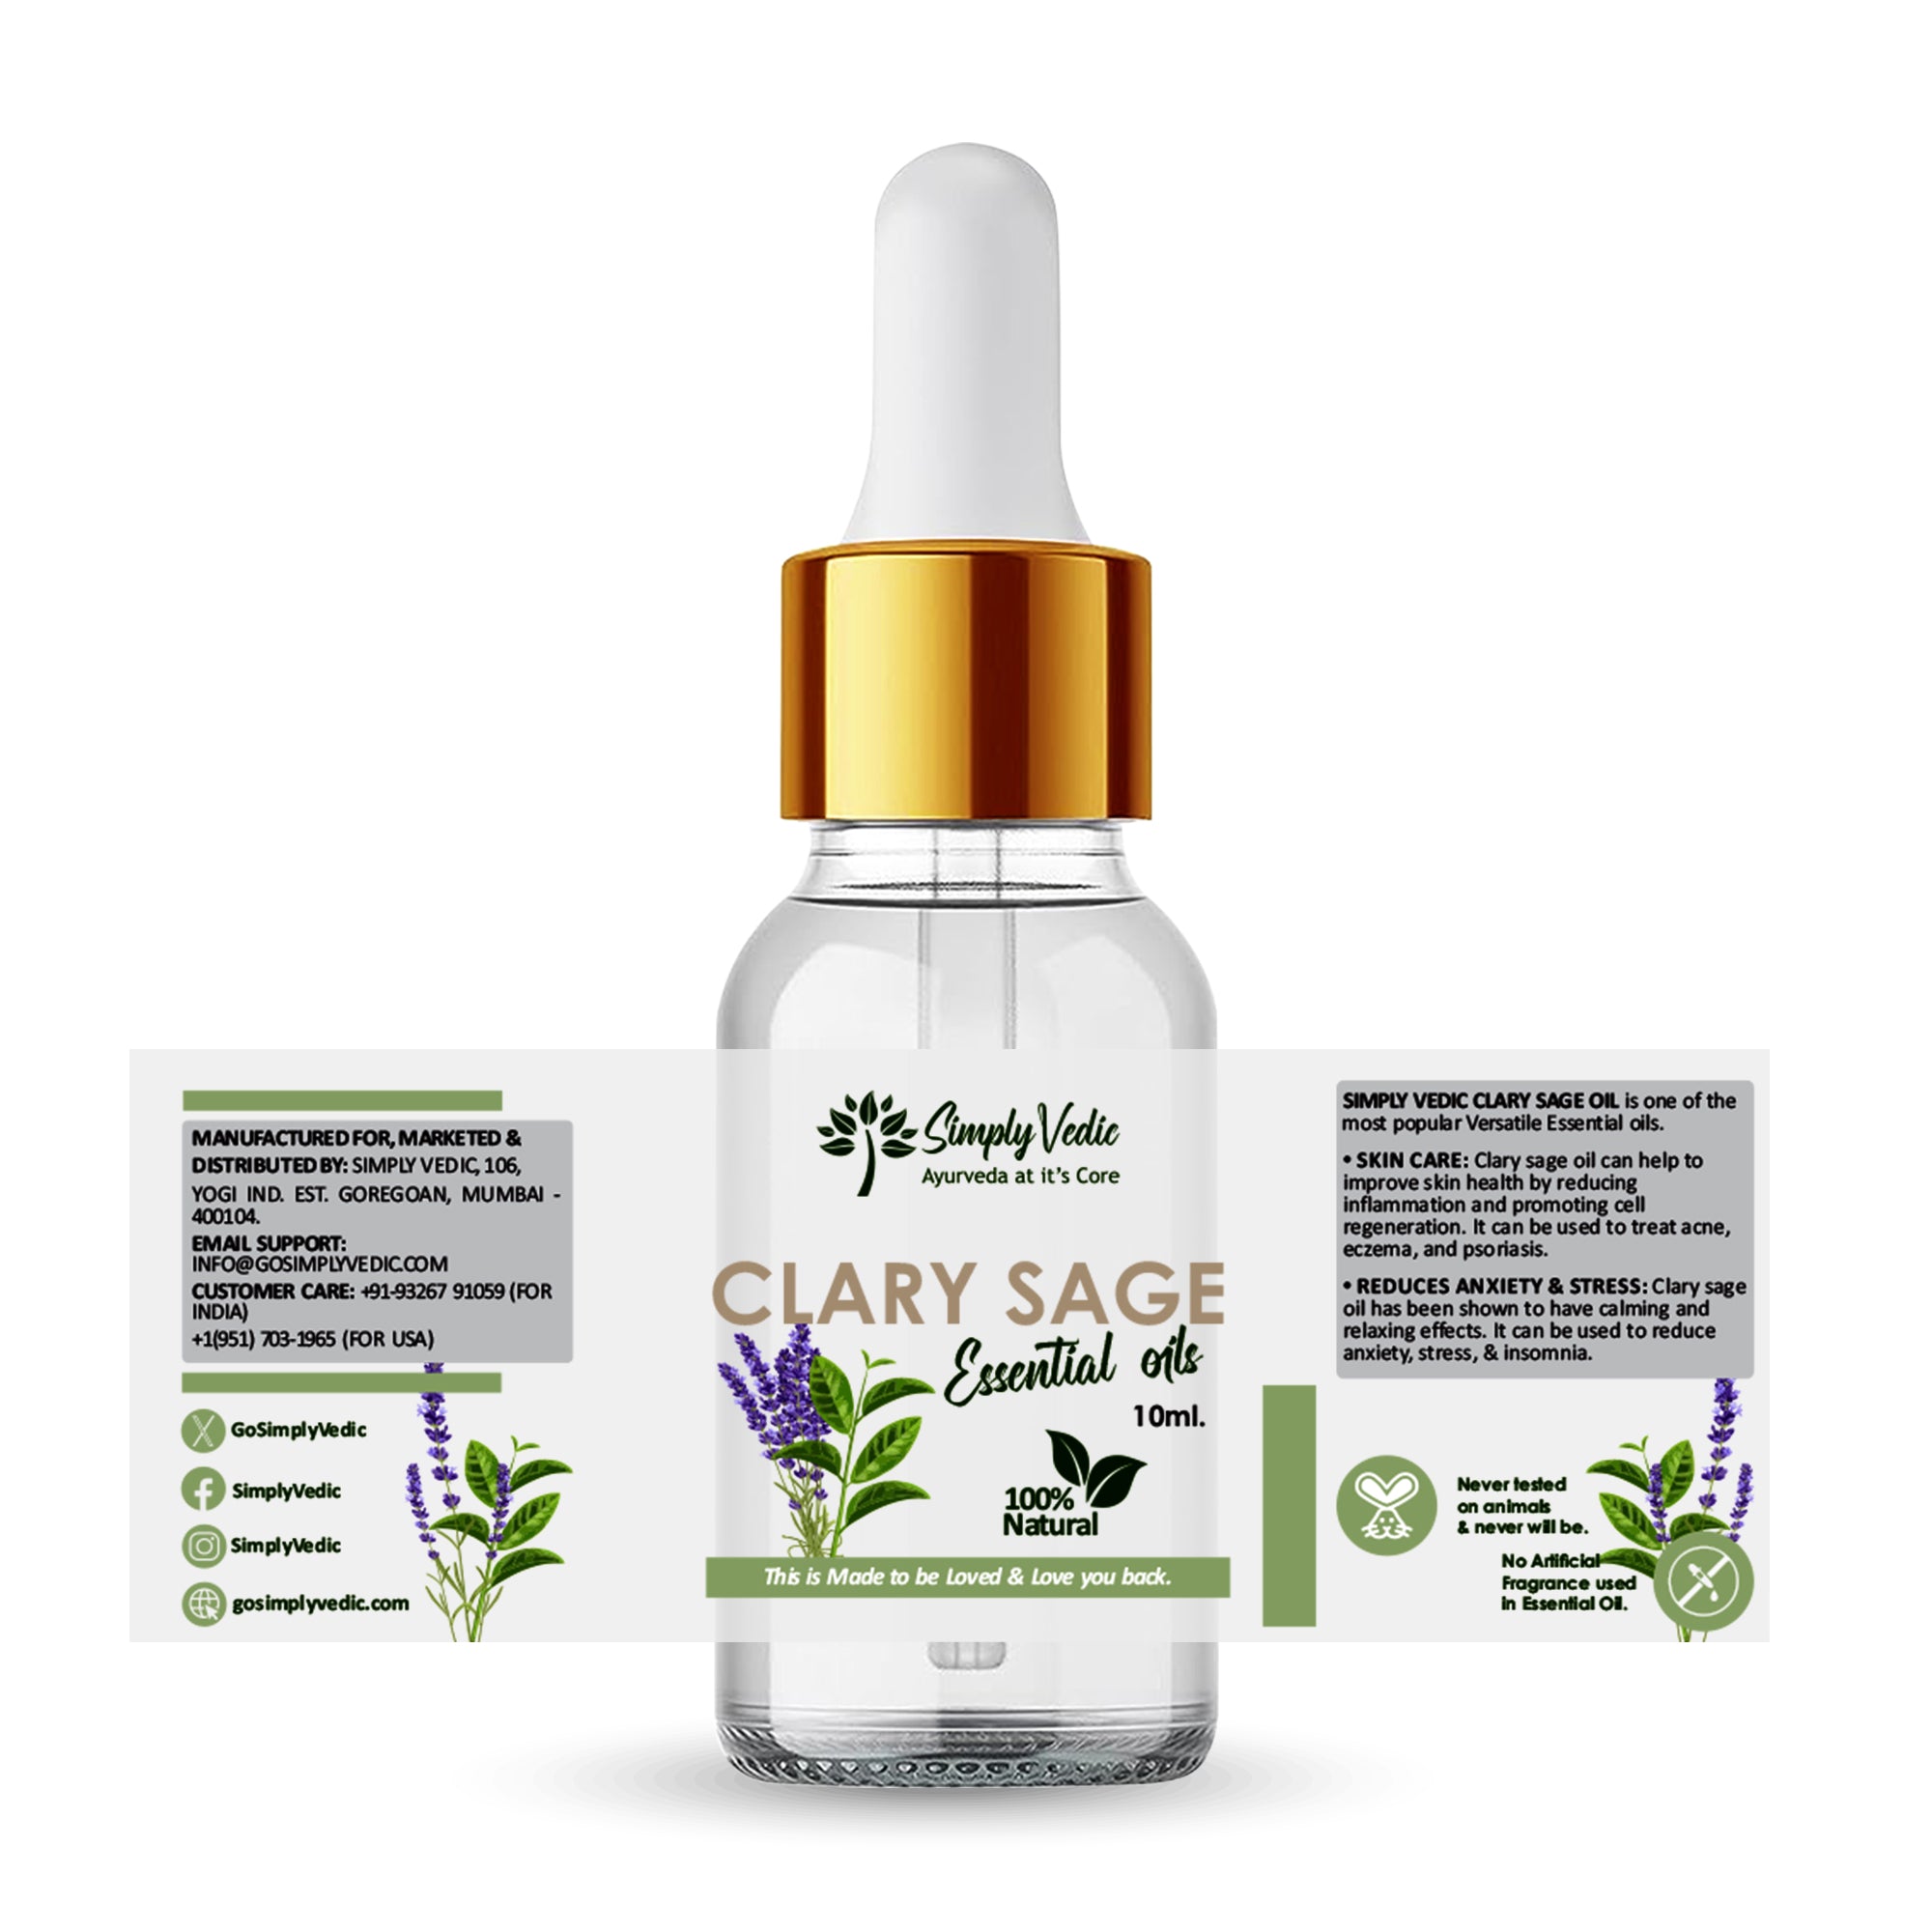 Simply Vedic Clary Sage Essential Oil